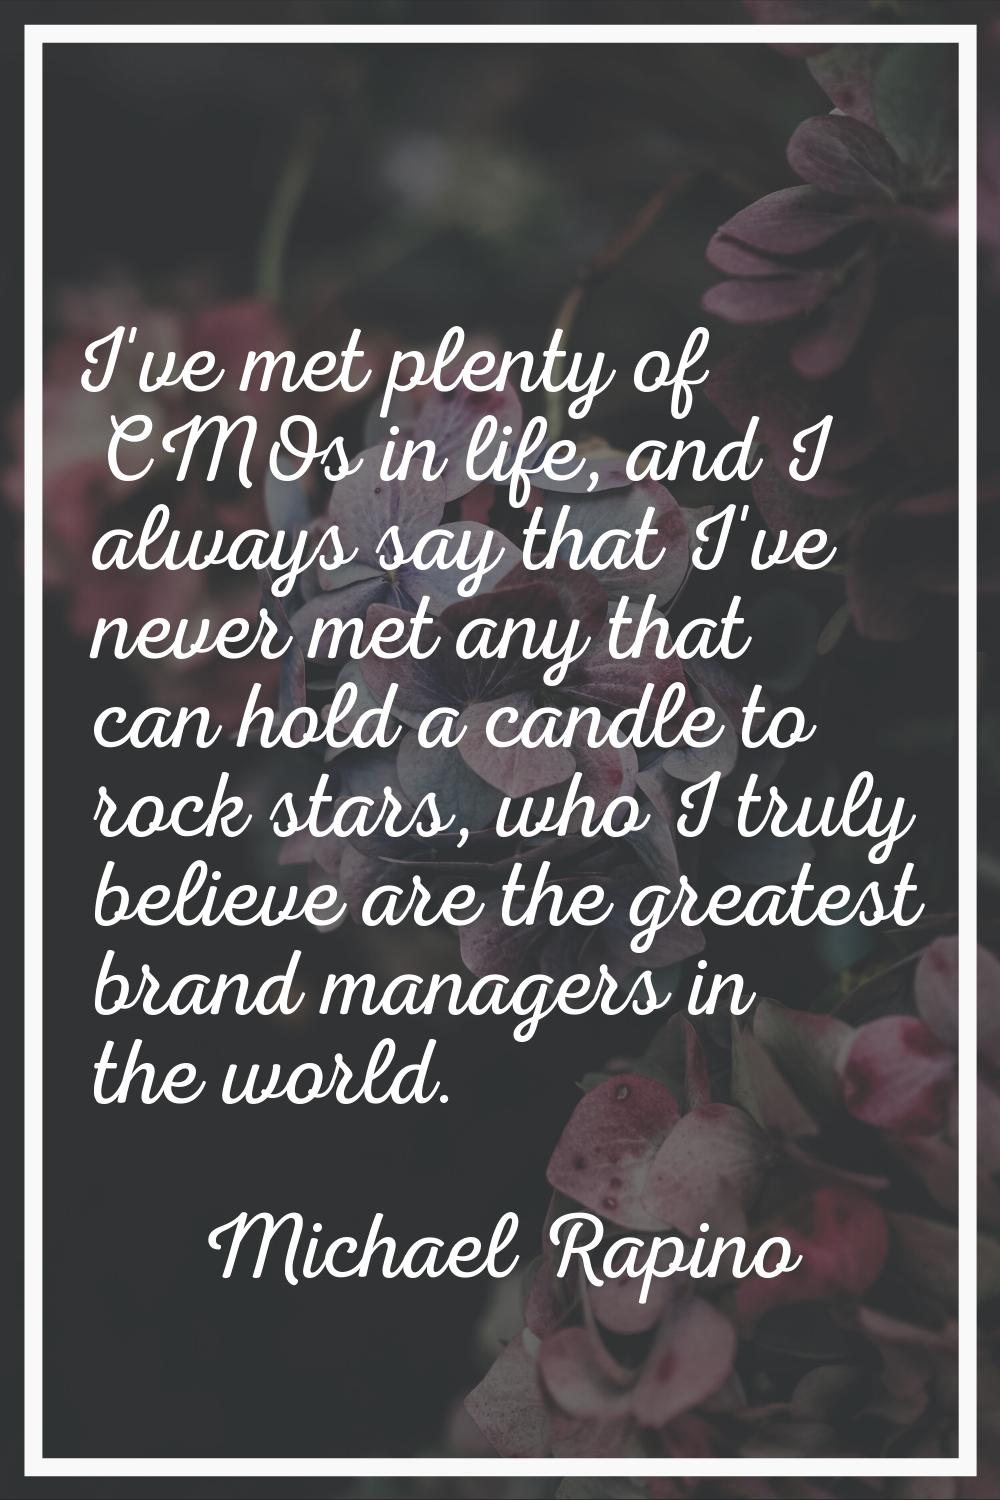 I've met plenty of CMOs in life, and I always say that I've never met any that can hold a candle to